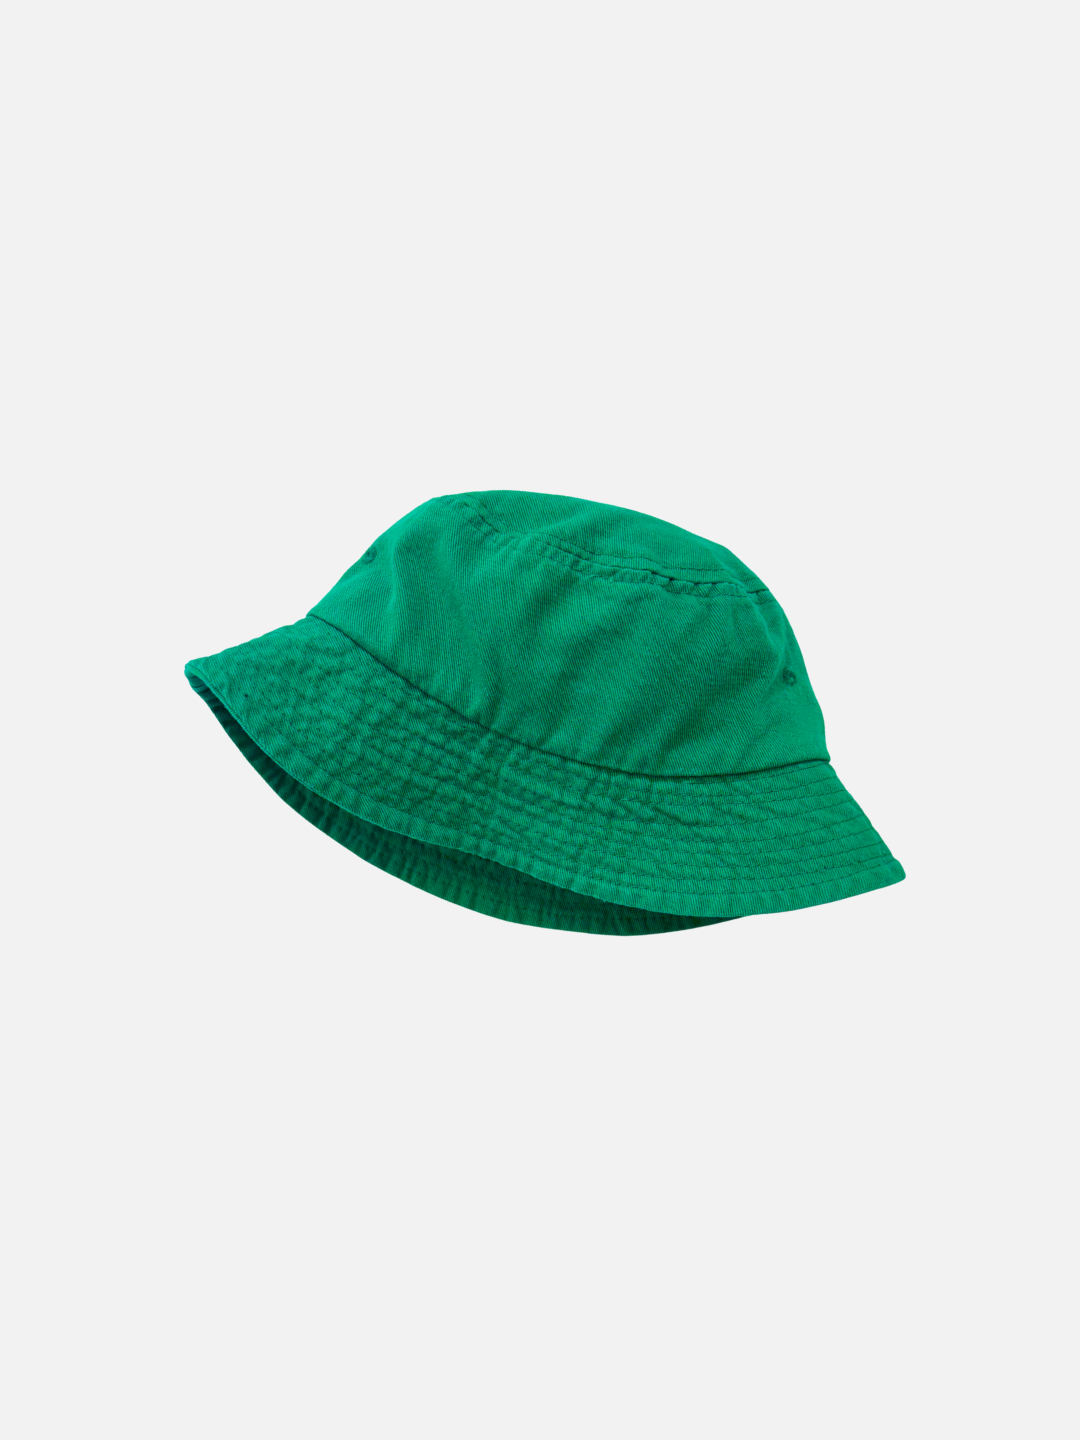 A FRONT VIEW OF KID'S PICNIC BUCKET HAT IN KELLY GREEN